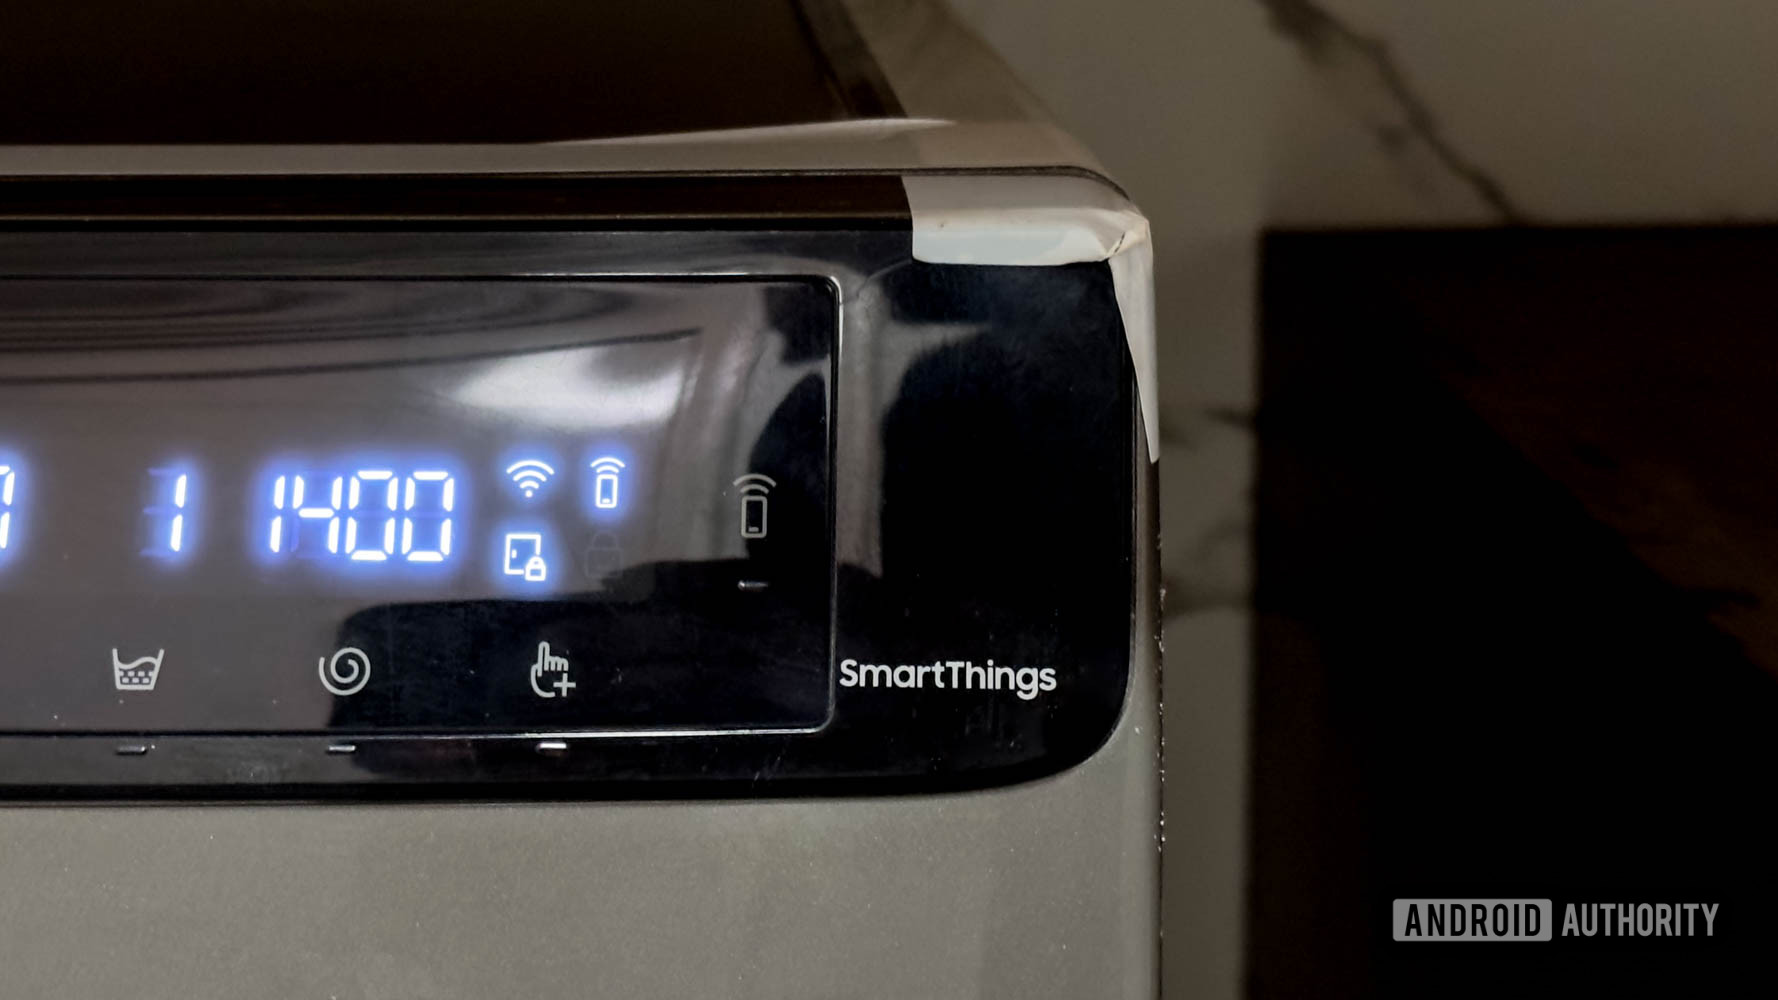 samsung washing machine and dryer with smartthings logo